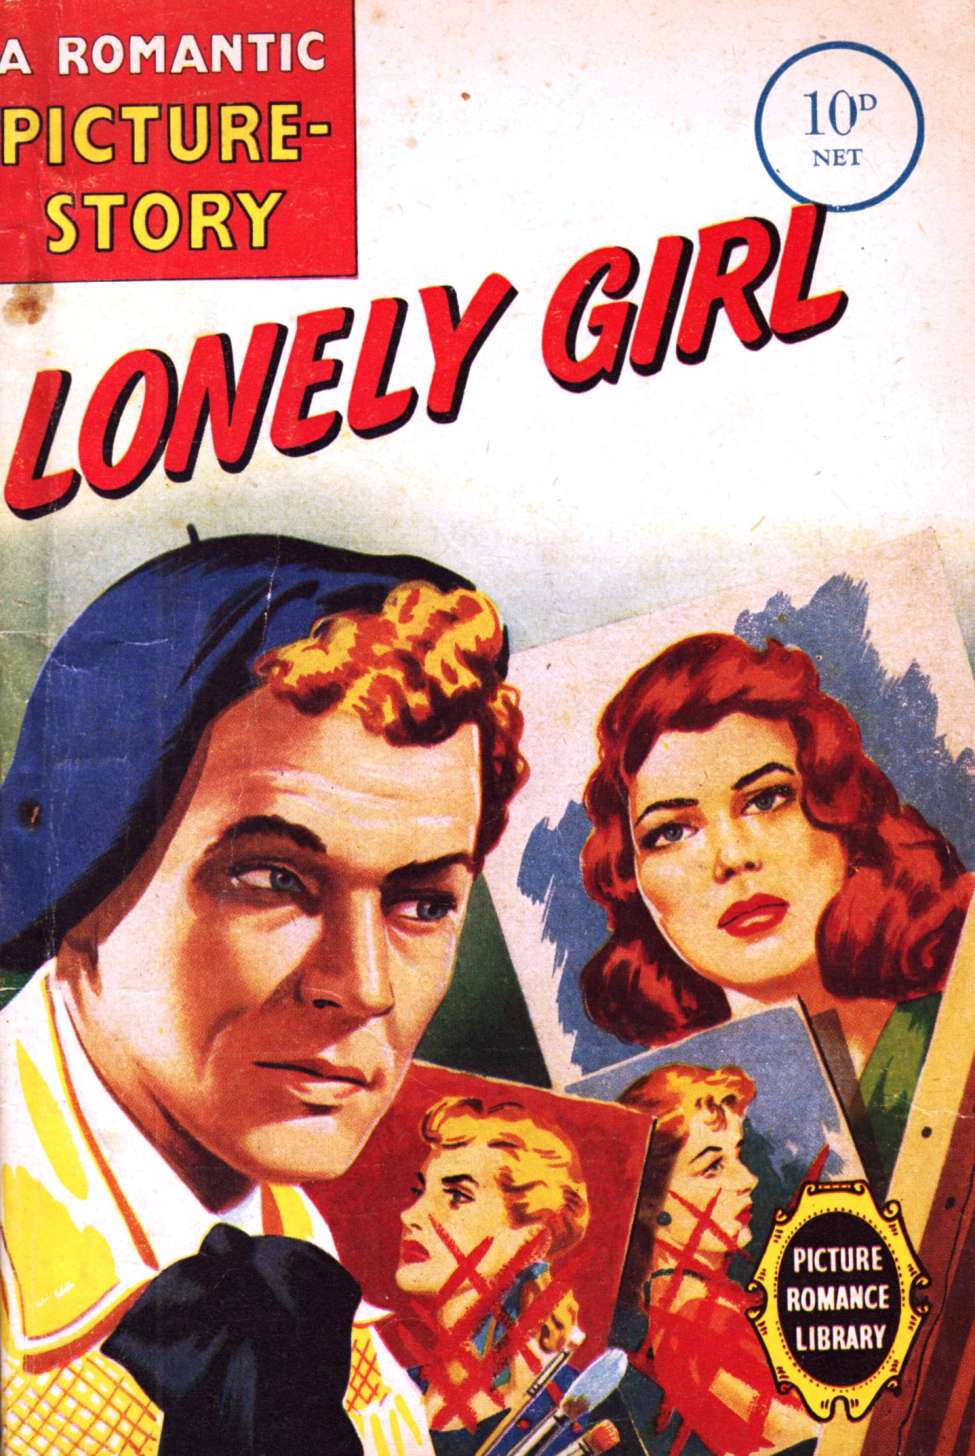 Book Cover For Picture Romance Library 81 - Lonely Girl